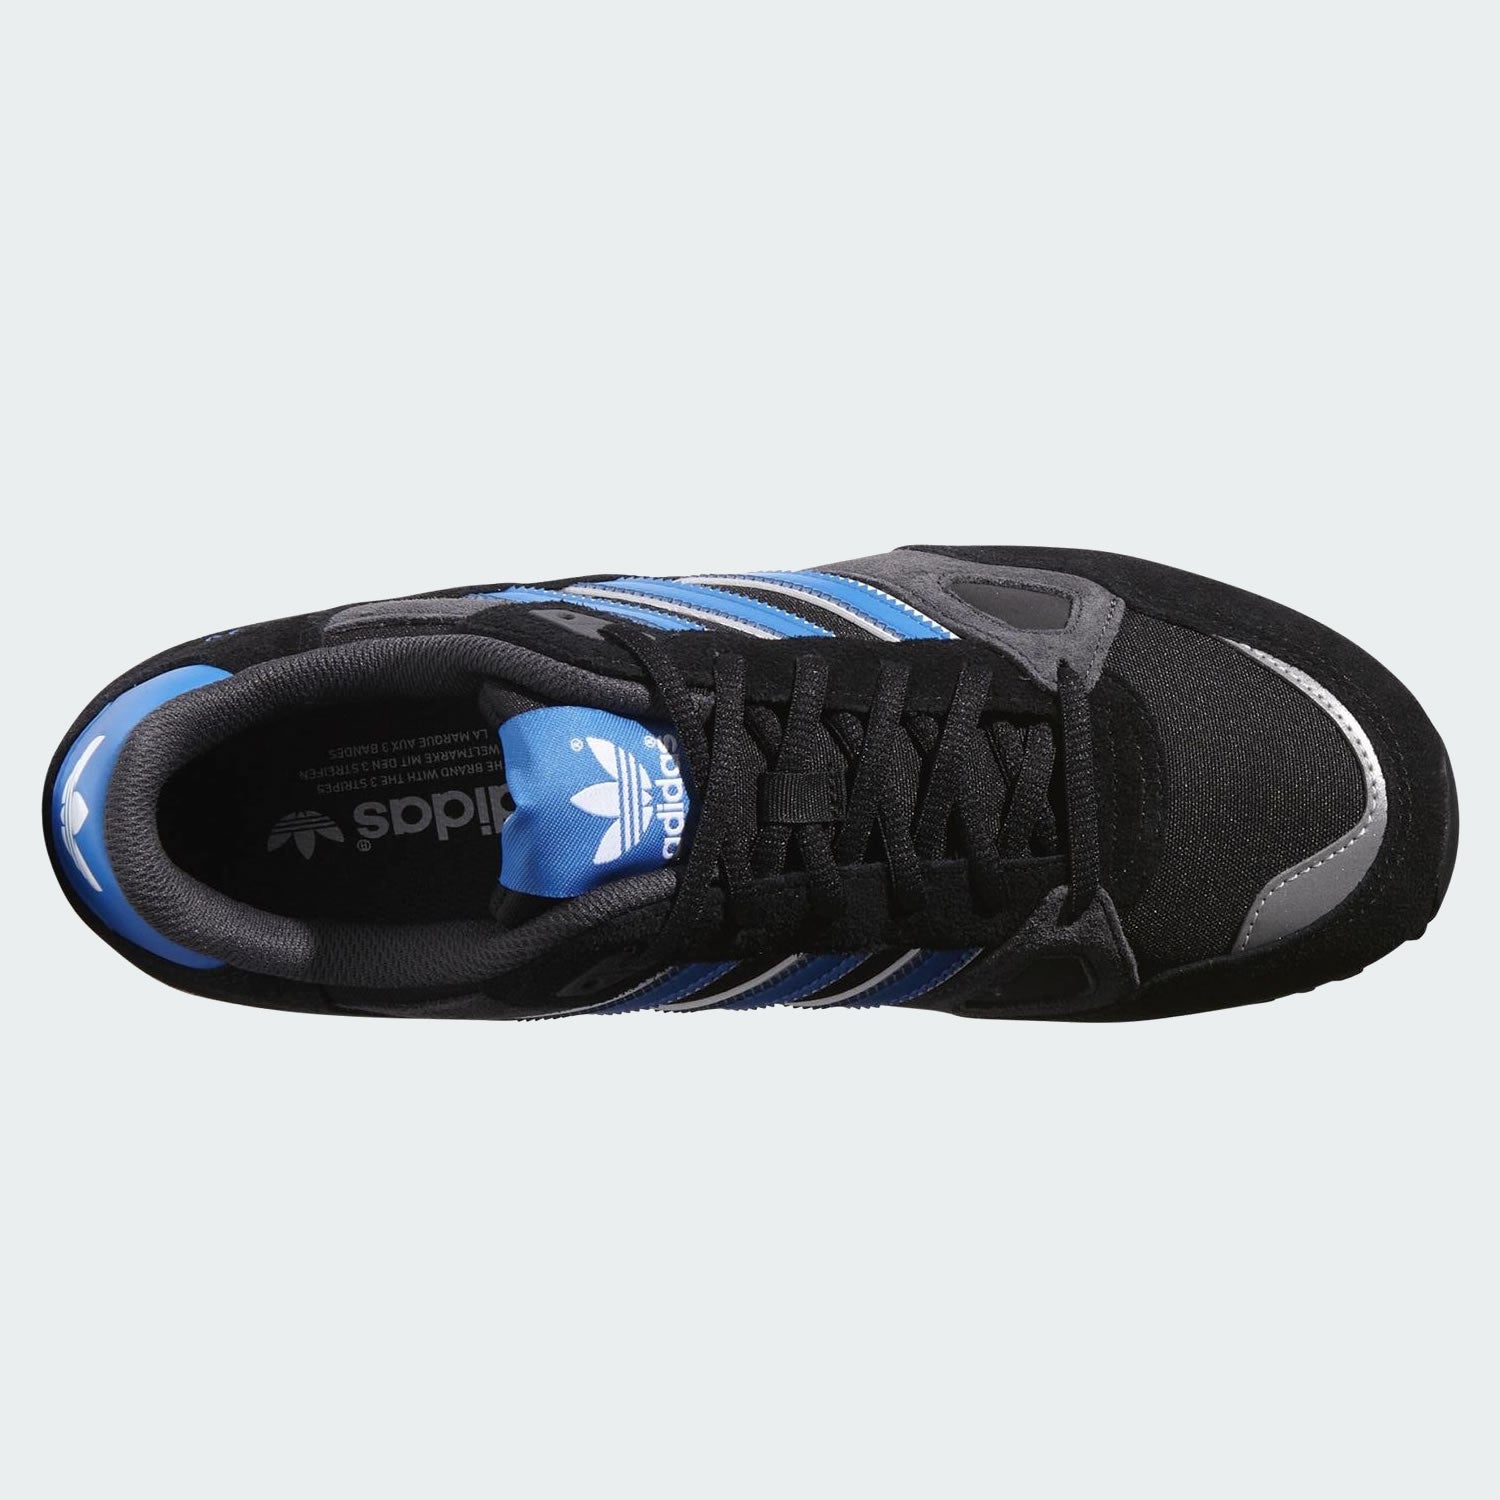 tradesports.co.uk Adidas Men's ZX 750 Trainers M18261